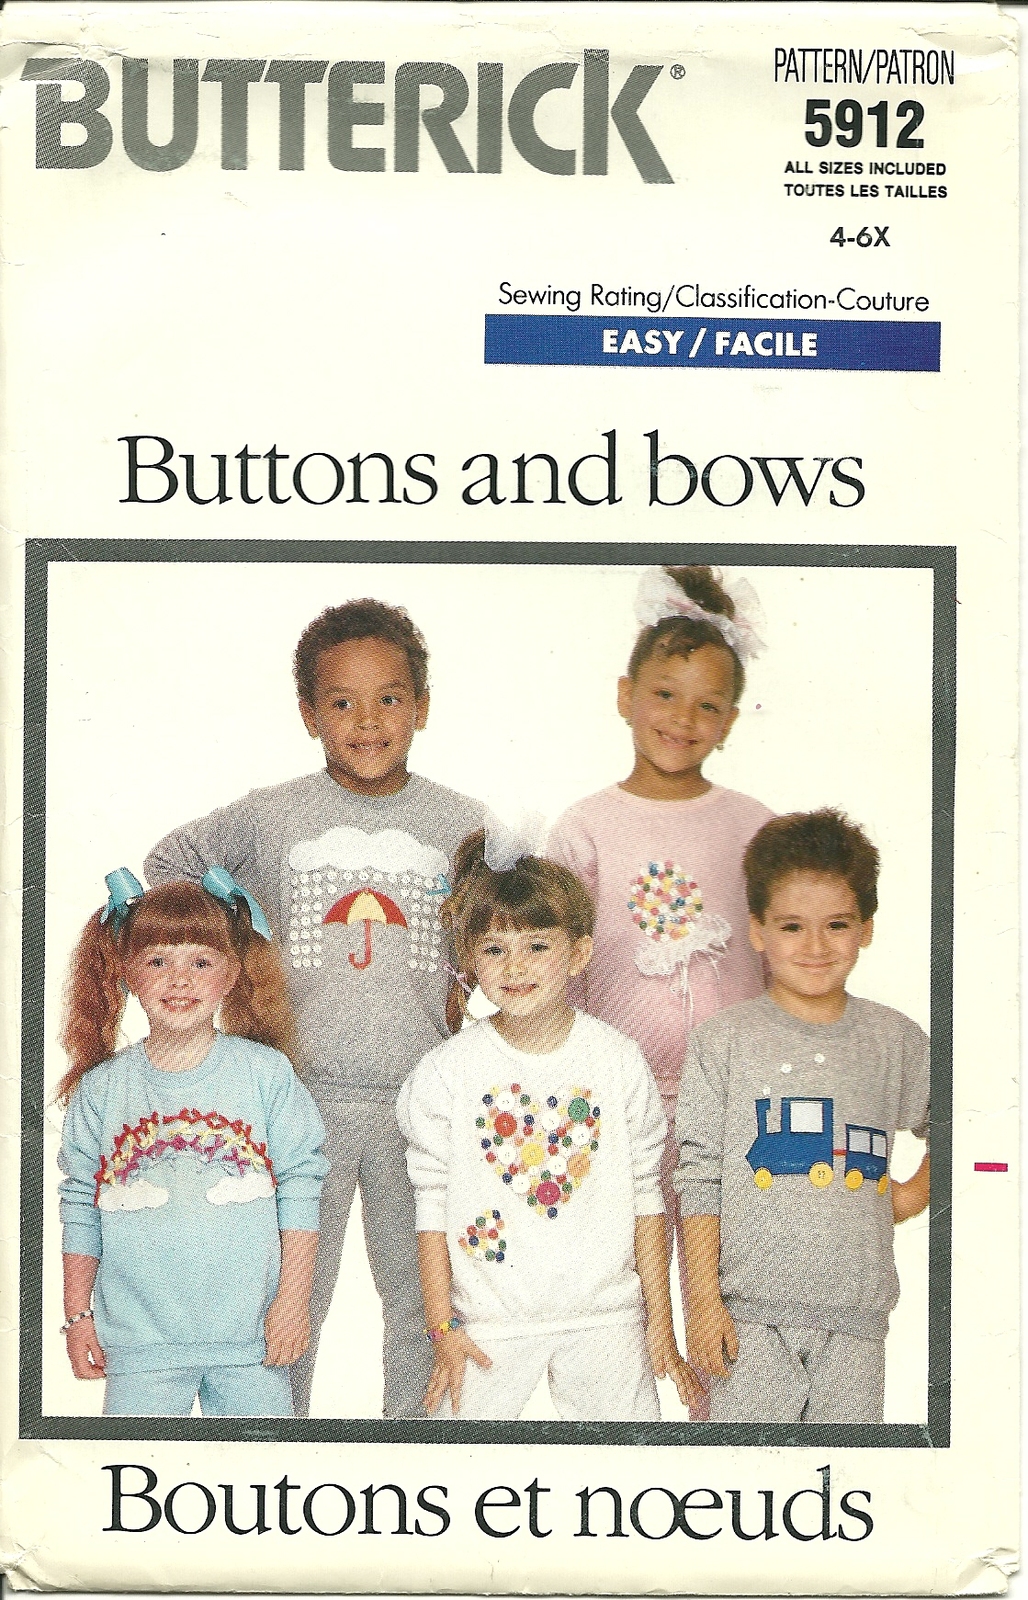 Butterick Sewing Pattern 5912 Childrens Sweat Suit Pants Top Size 4 5 6 6X New - $9.99